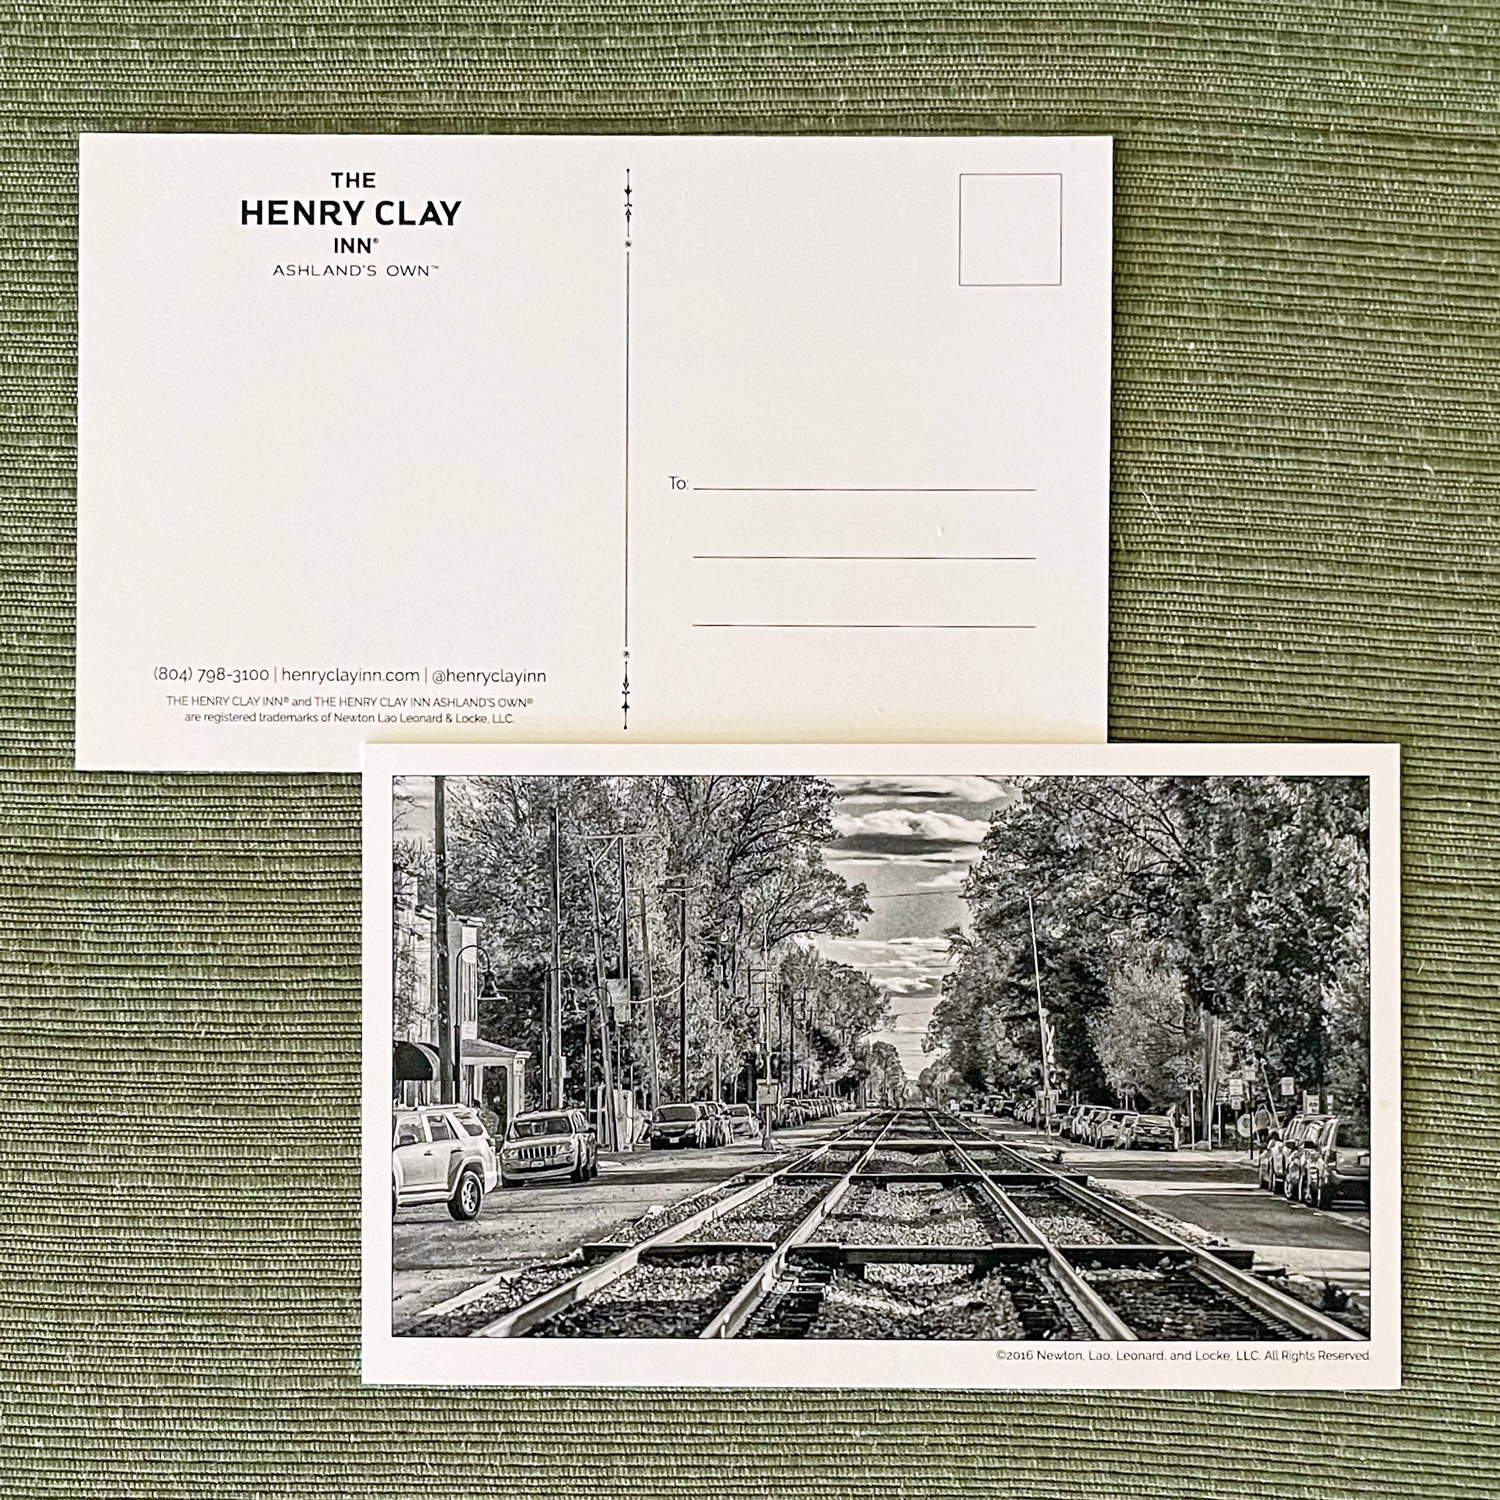 Share Your Travels with a Postcard $2